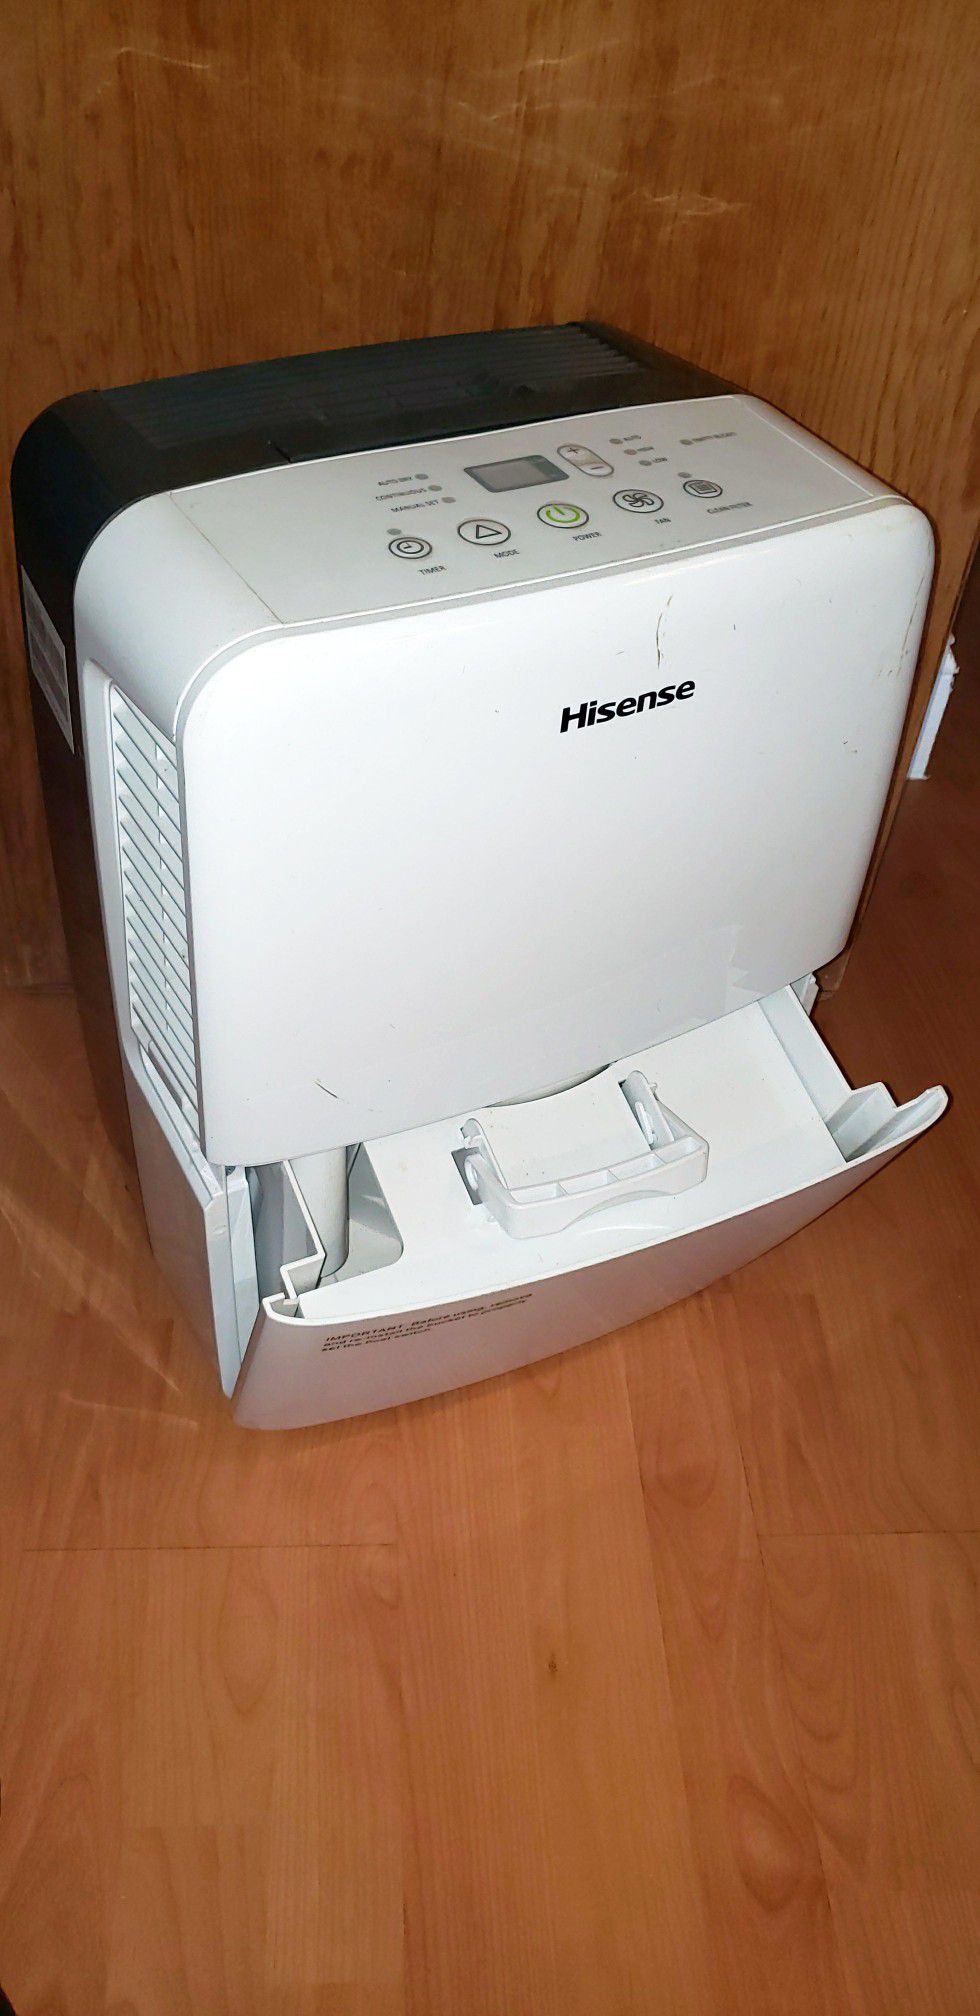 Whirlpool/Hisense Dehumidifier Portable on wheels, 35 Pints/day. All Automatic digital settings. Works Perfect